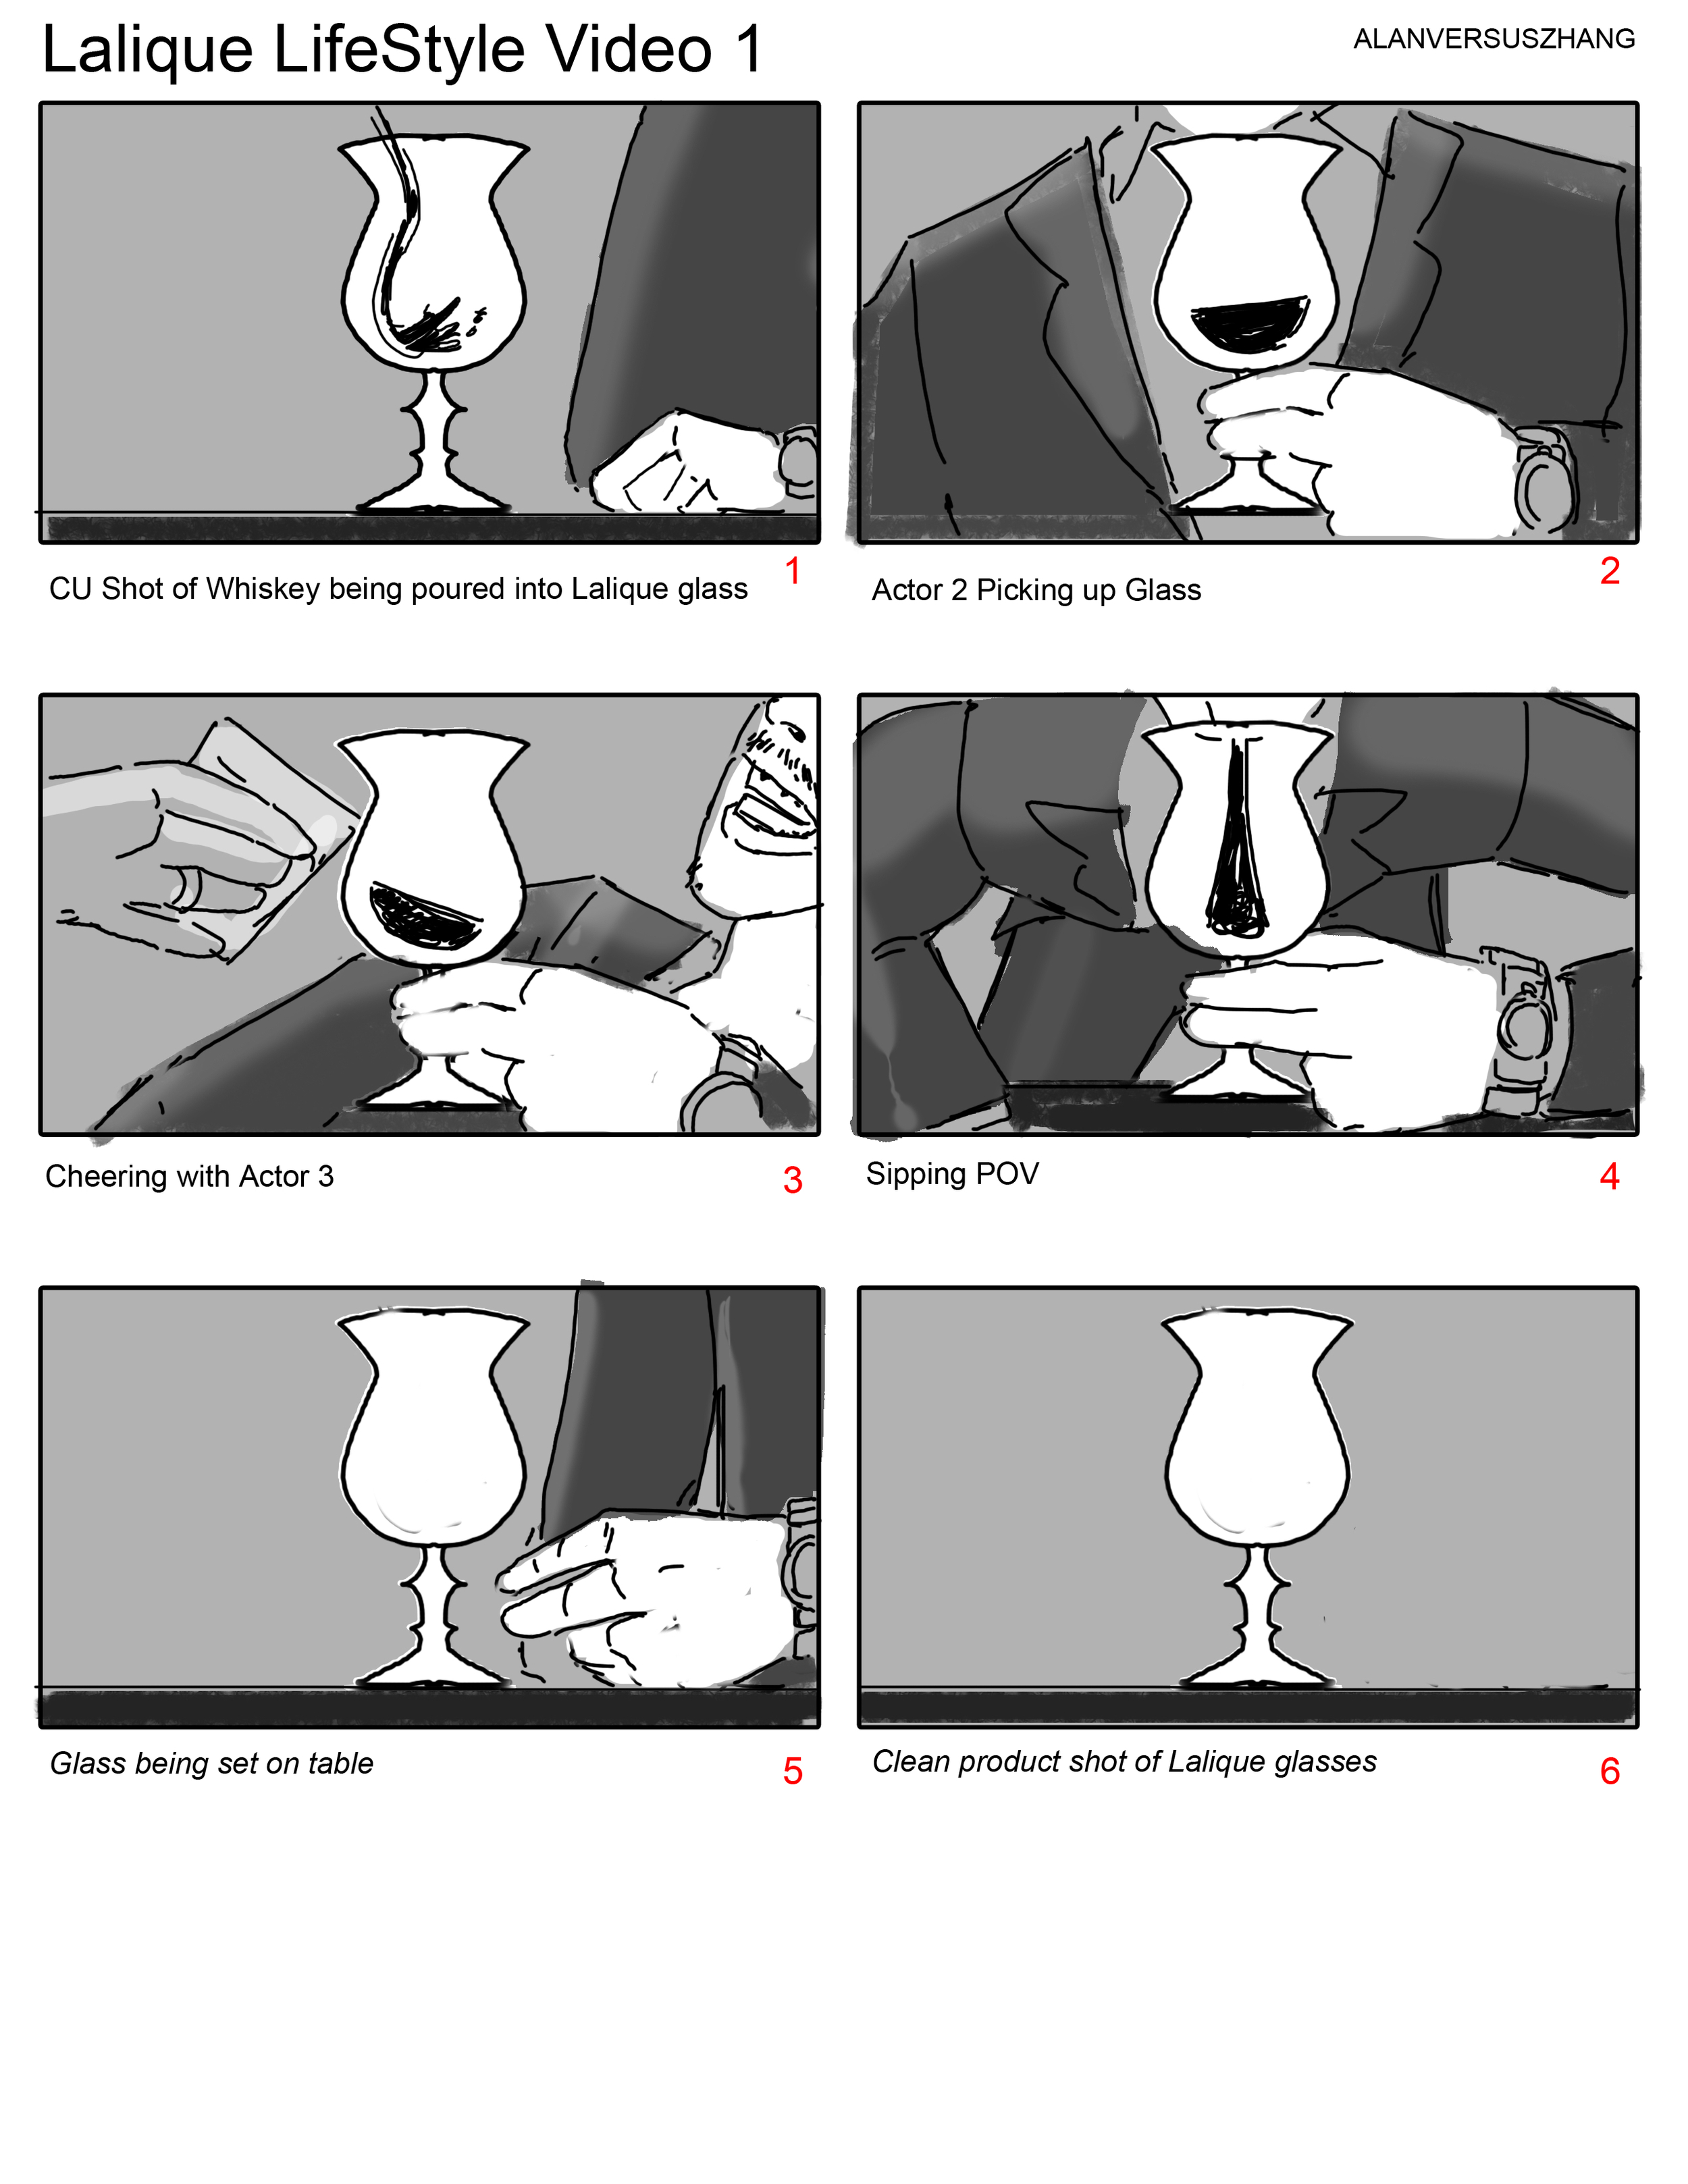 11.10.23_Macallan_Storyboards_Page_13_Image_0001.png